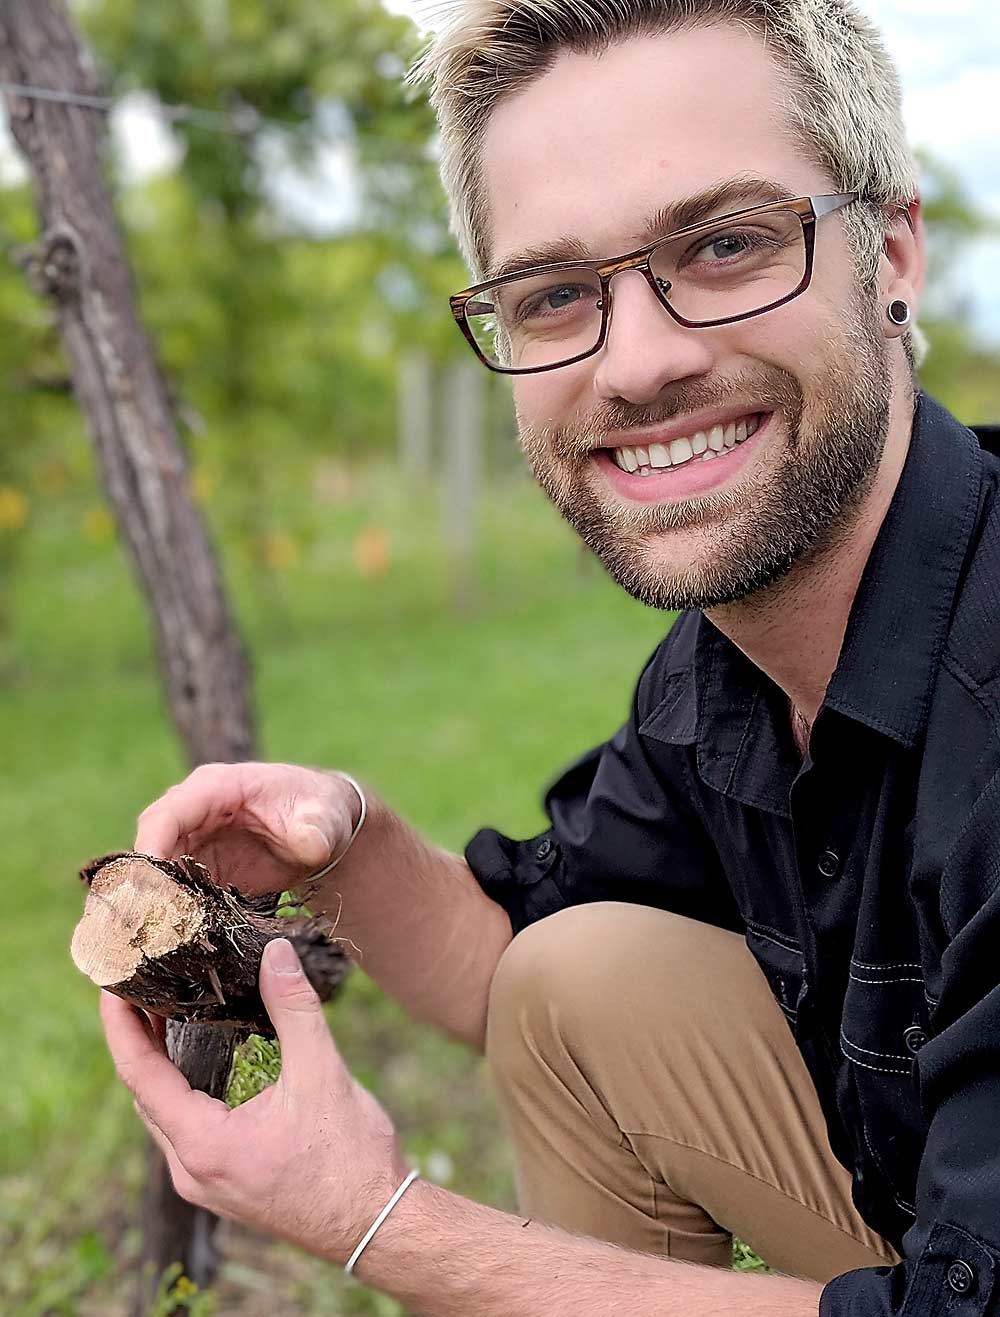 University of Minnesota graduate student Davy DeKrey shows a grapevine trunk sample with both winter injury cracking and fungal infection. Growers may confuse the dieback symptoms, he said, but winter injury, like pruning wounds, can create entry points for the pathogens that cause the grapevine trunk disease complex. (Courtesy Davy DeKrey/University of Minnesota)